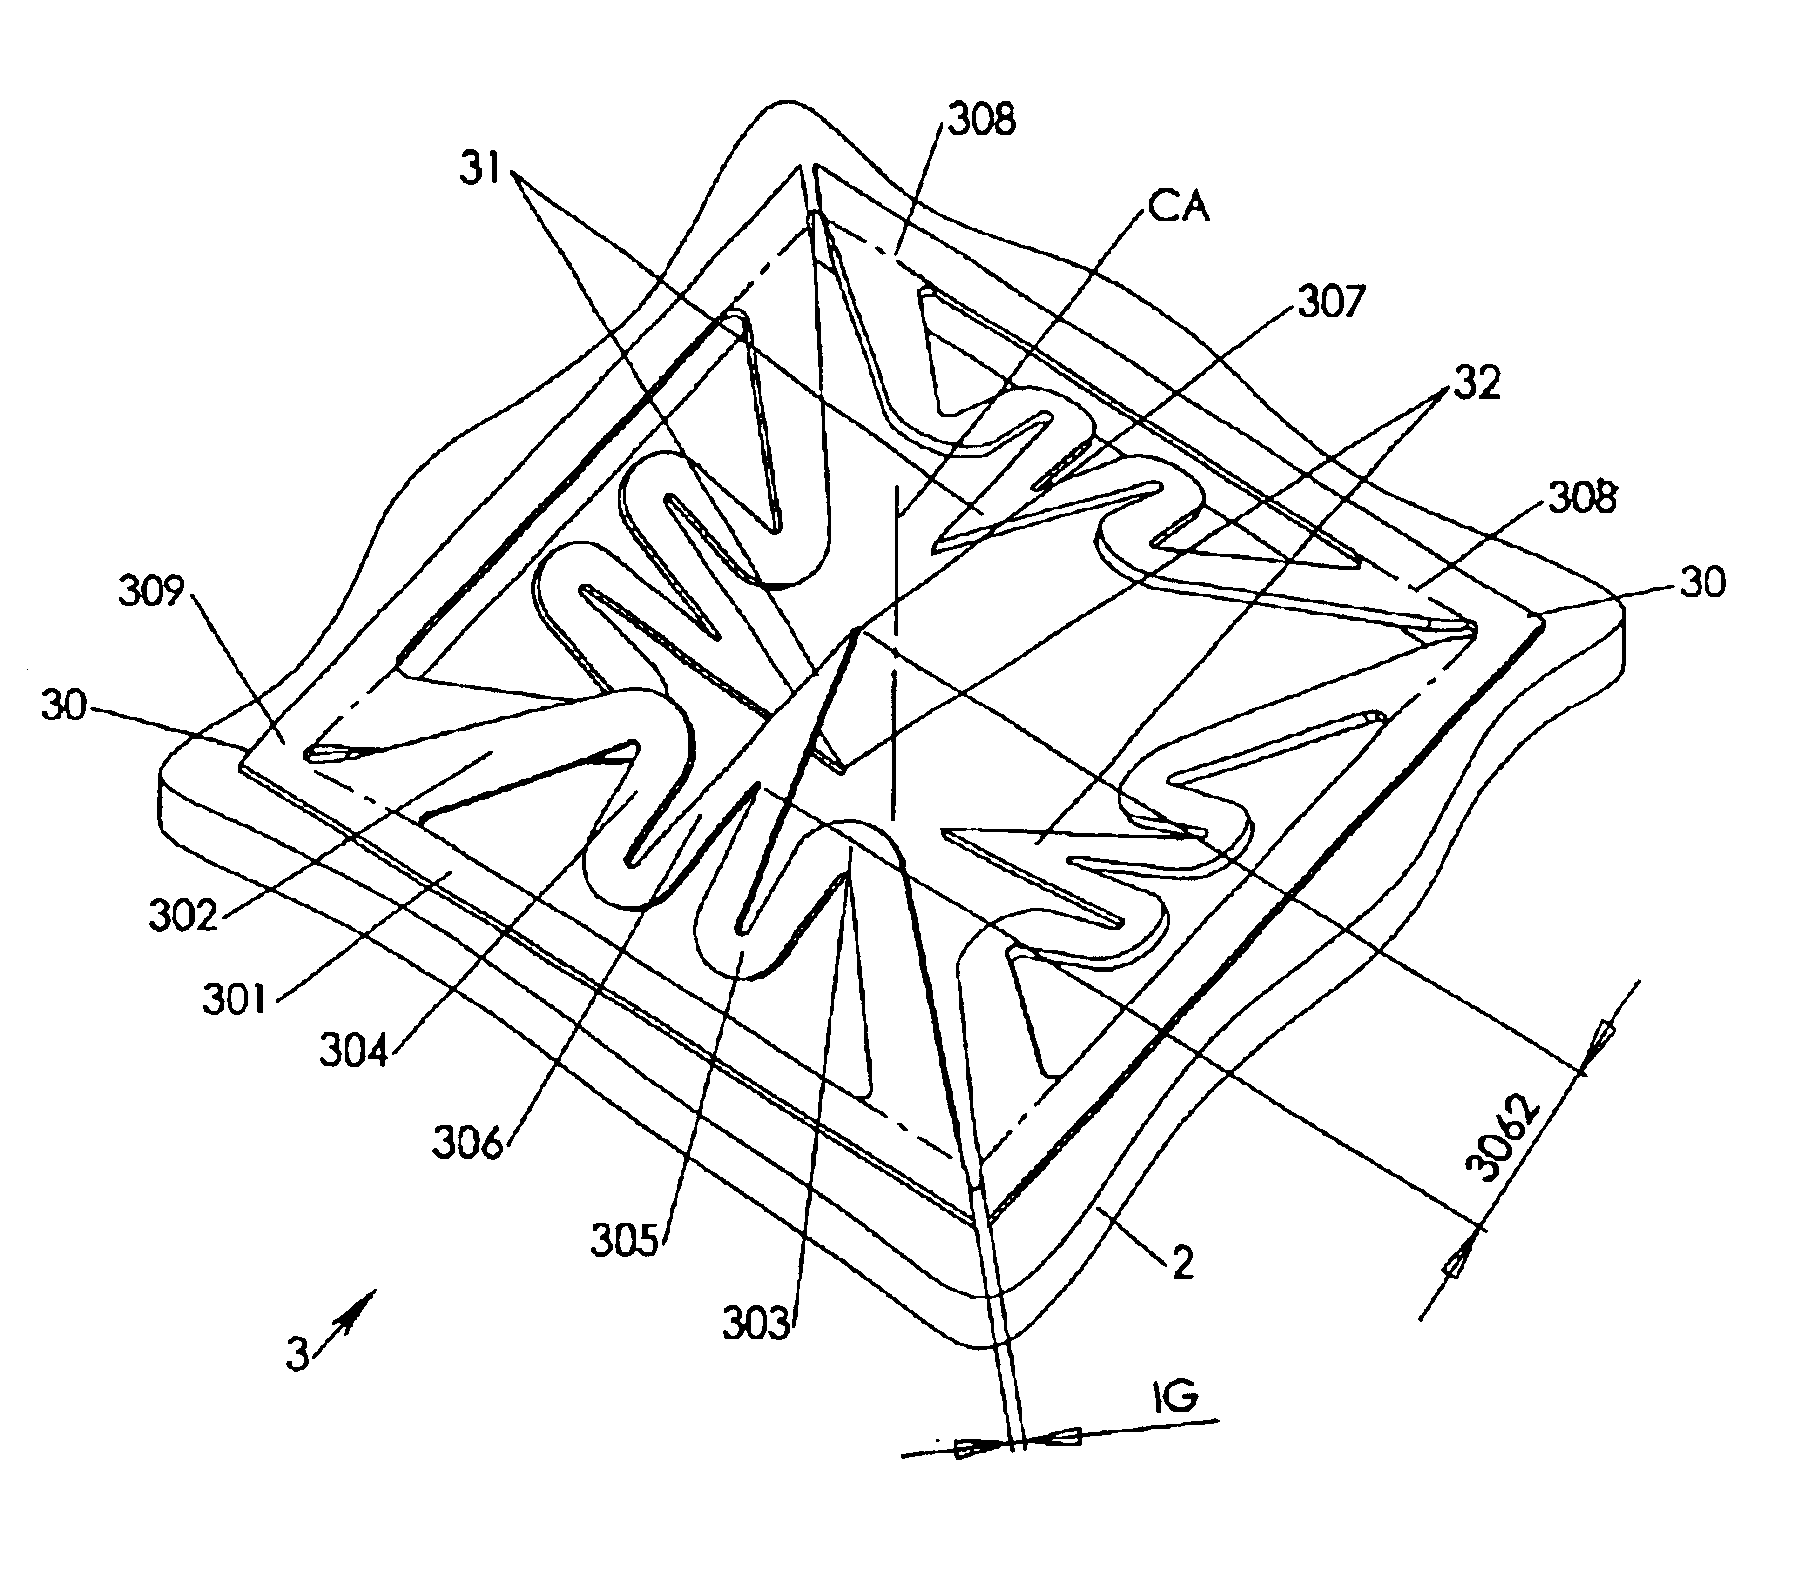 Multipath interconnect with meandering contact cantilevers